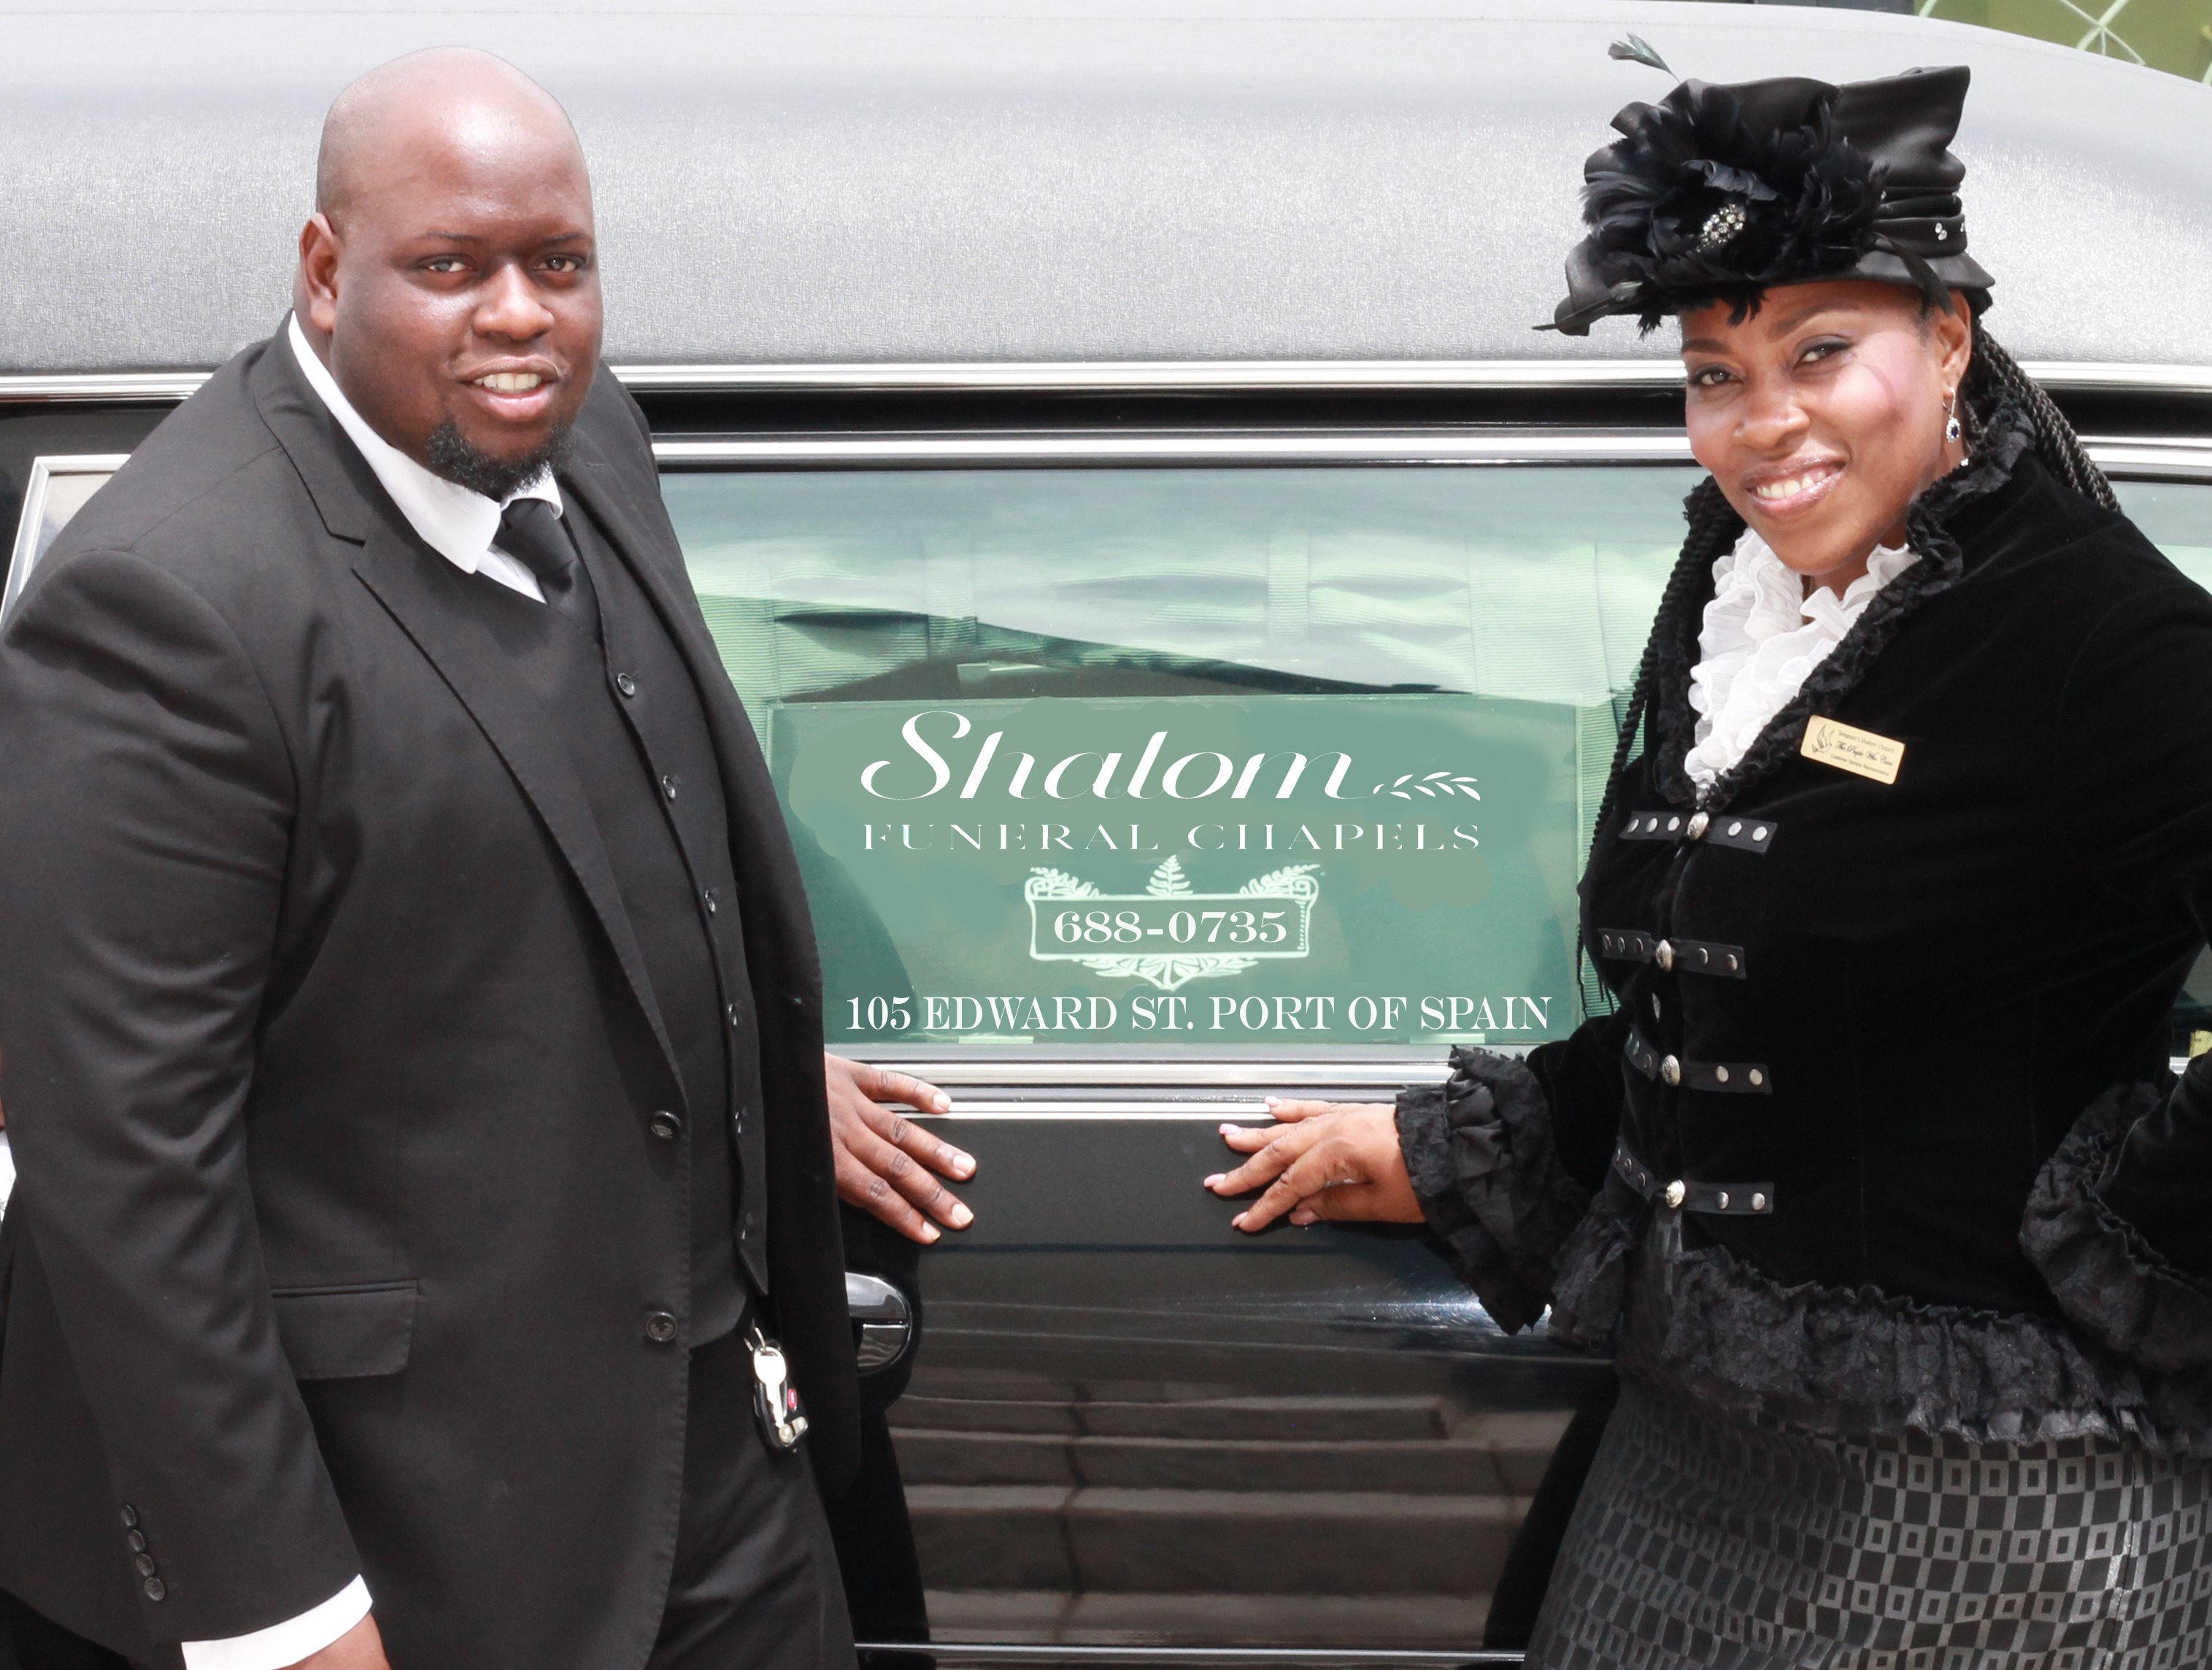 Shalom Funeral Chapels Limited - CREMATORIA